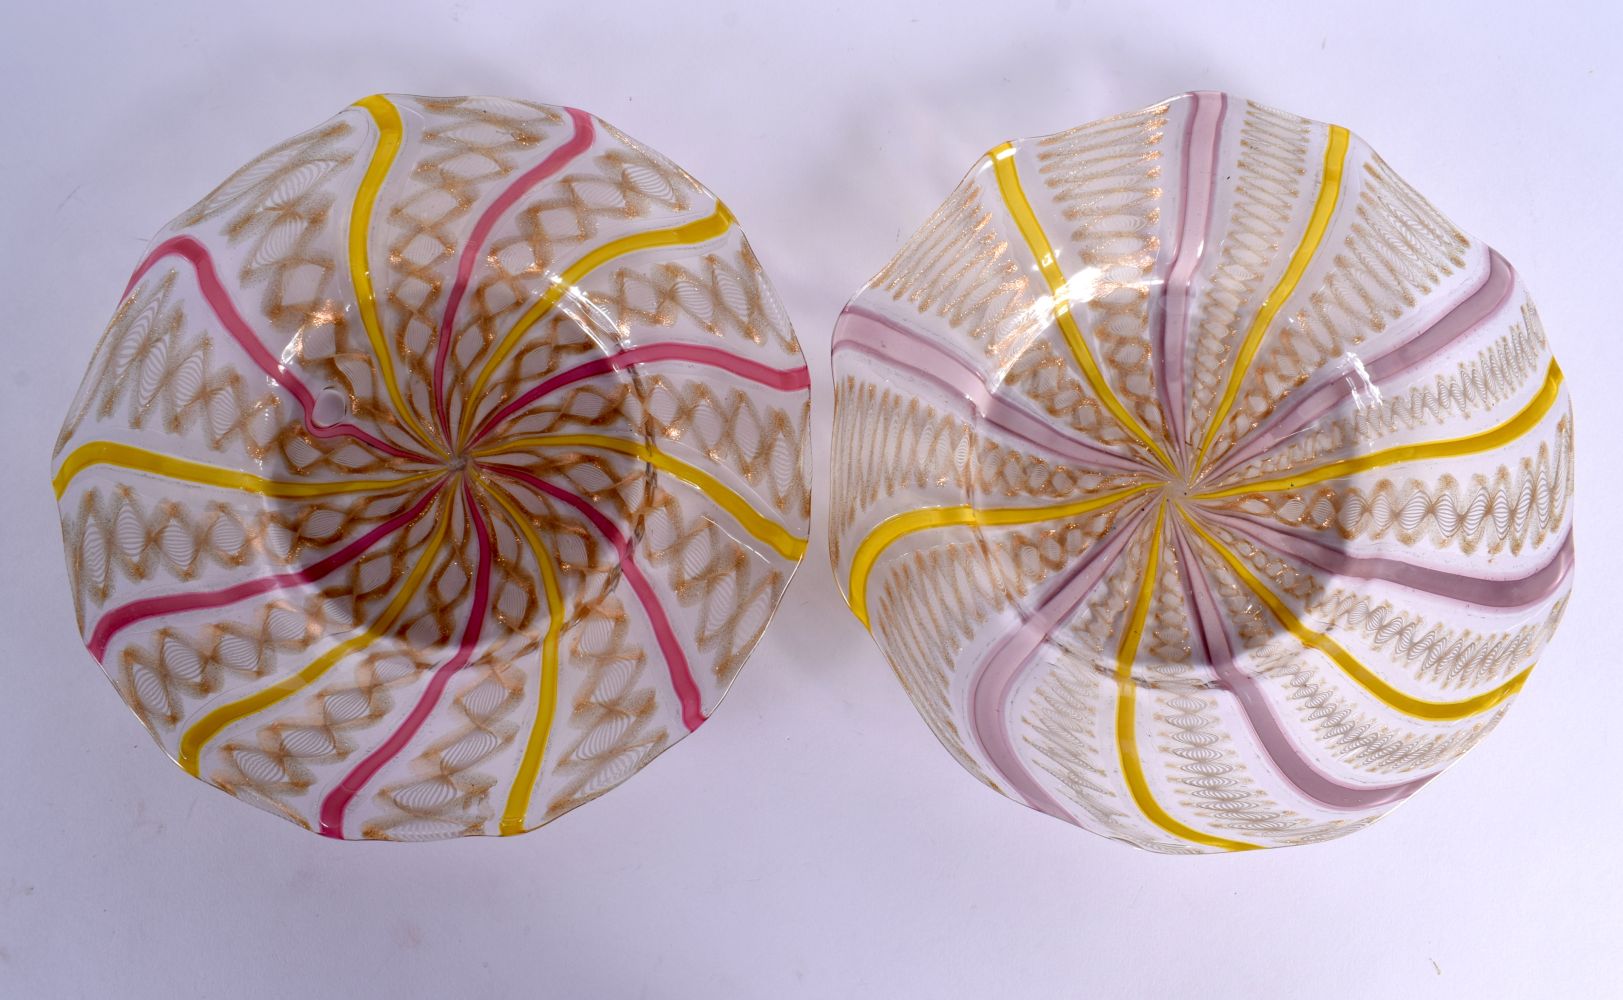 AN UNUSUAL PAIR OF EARLY 20TH CENTURY GLASS TWIST PLATES with pink swirling decoration. 19 cm wide.